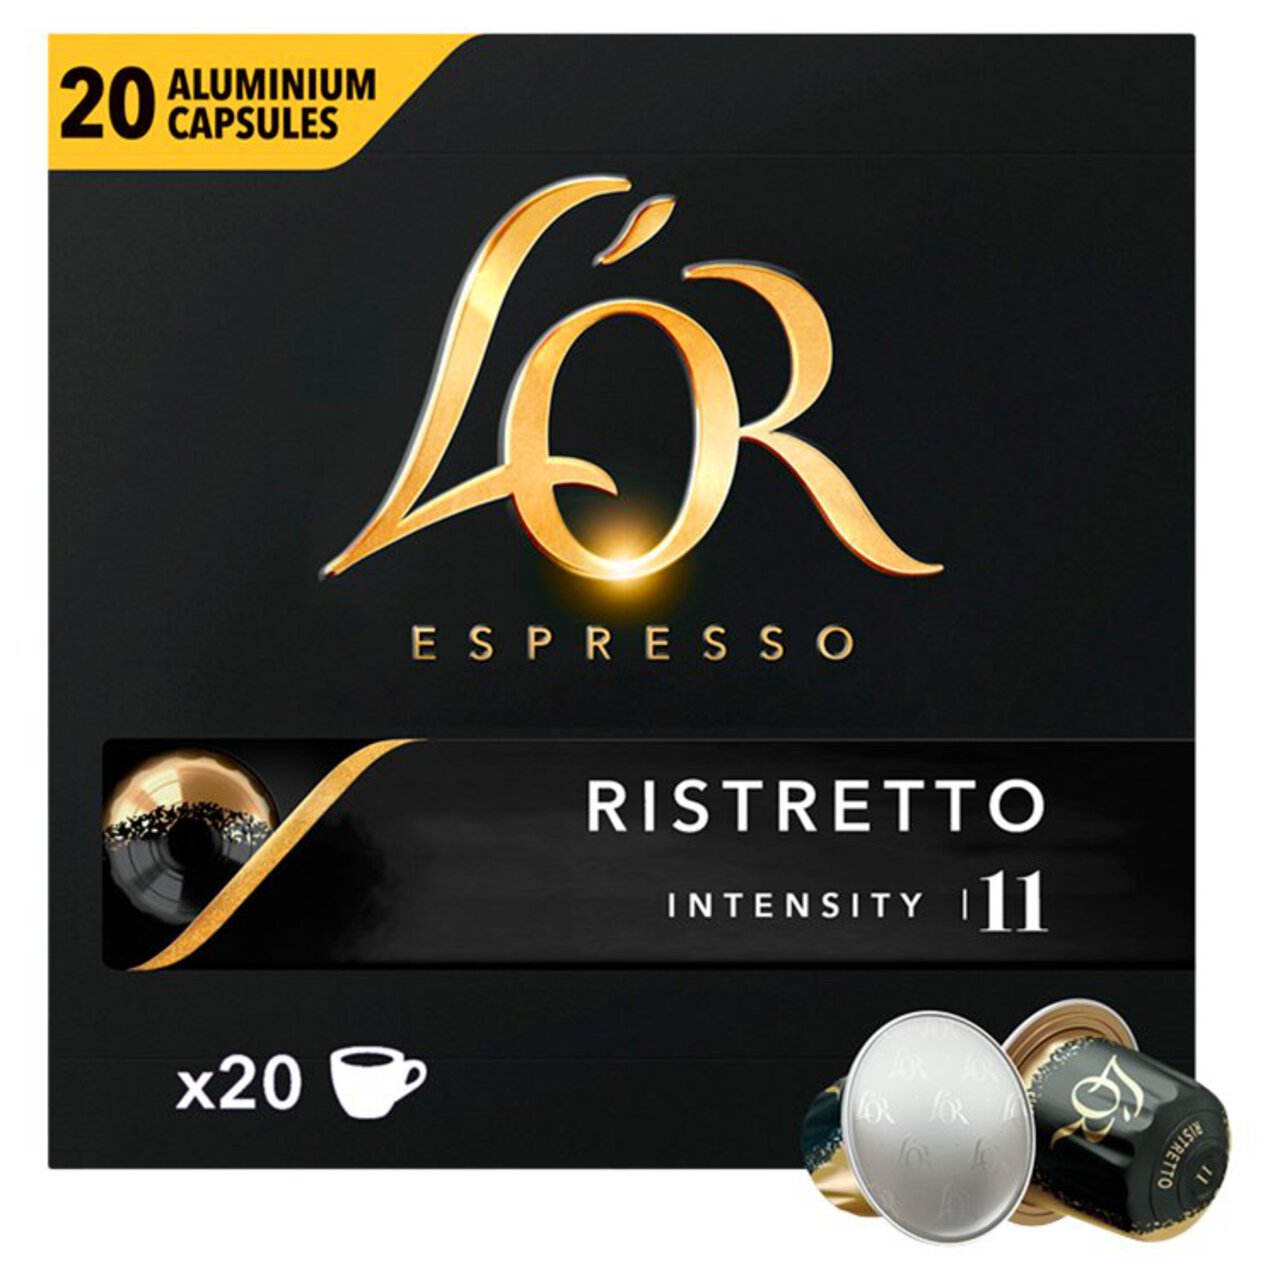 L'OR Ristretto Coffee Pods x20 Intensity 11 20 per pack